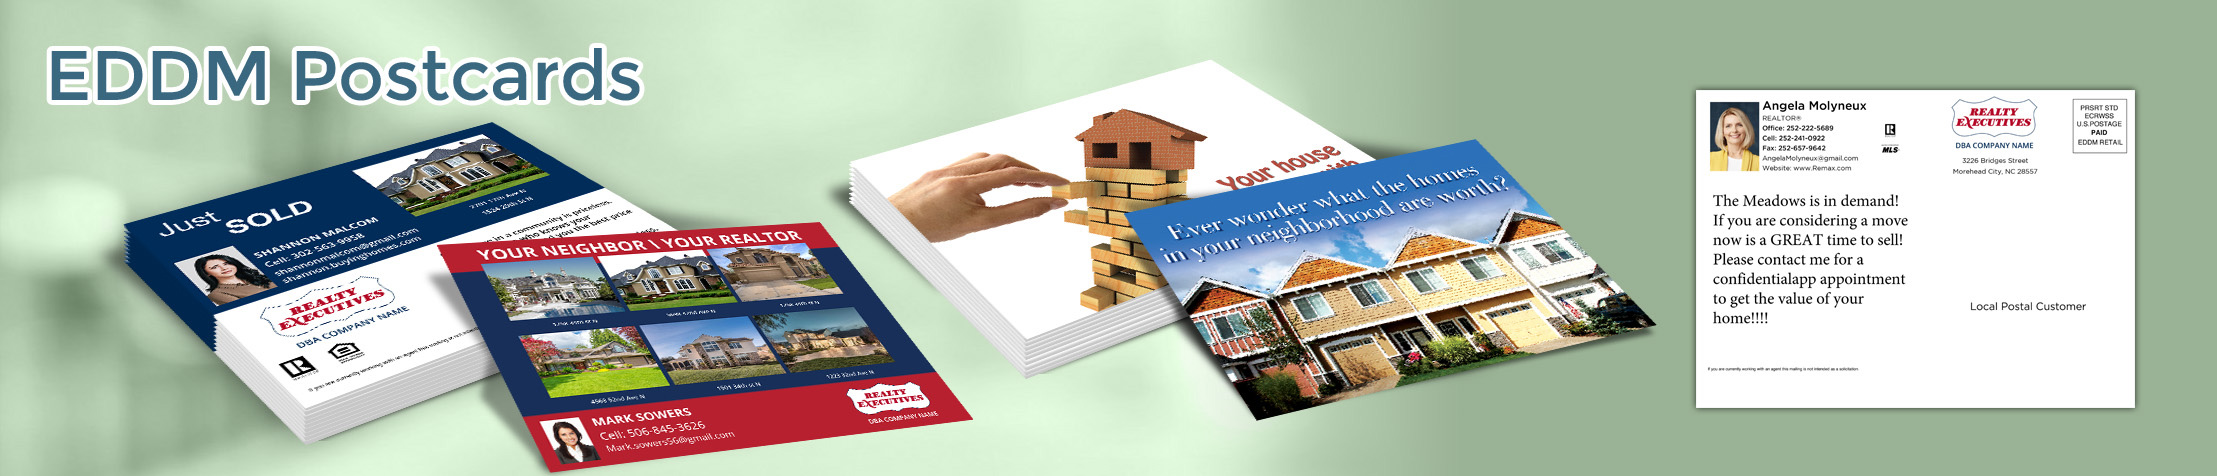 Realty Executives Real Estate EDDM Postcards - personalized Every Door Direct Mail Postcards | BestPrintBuy.com